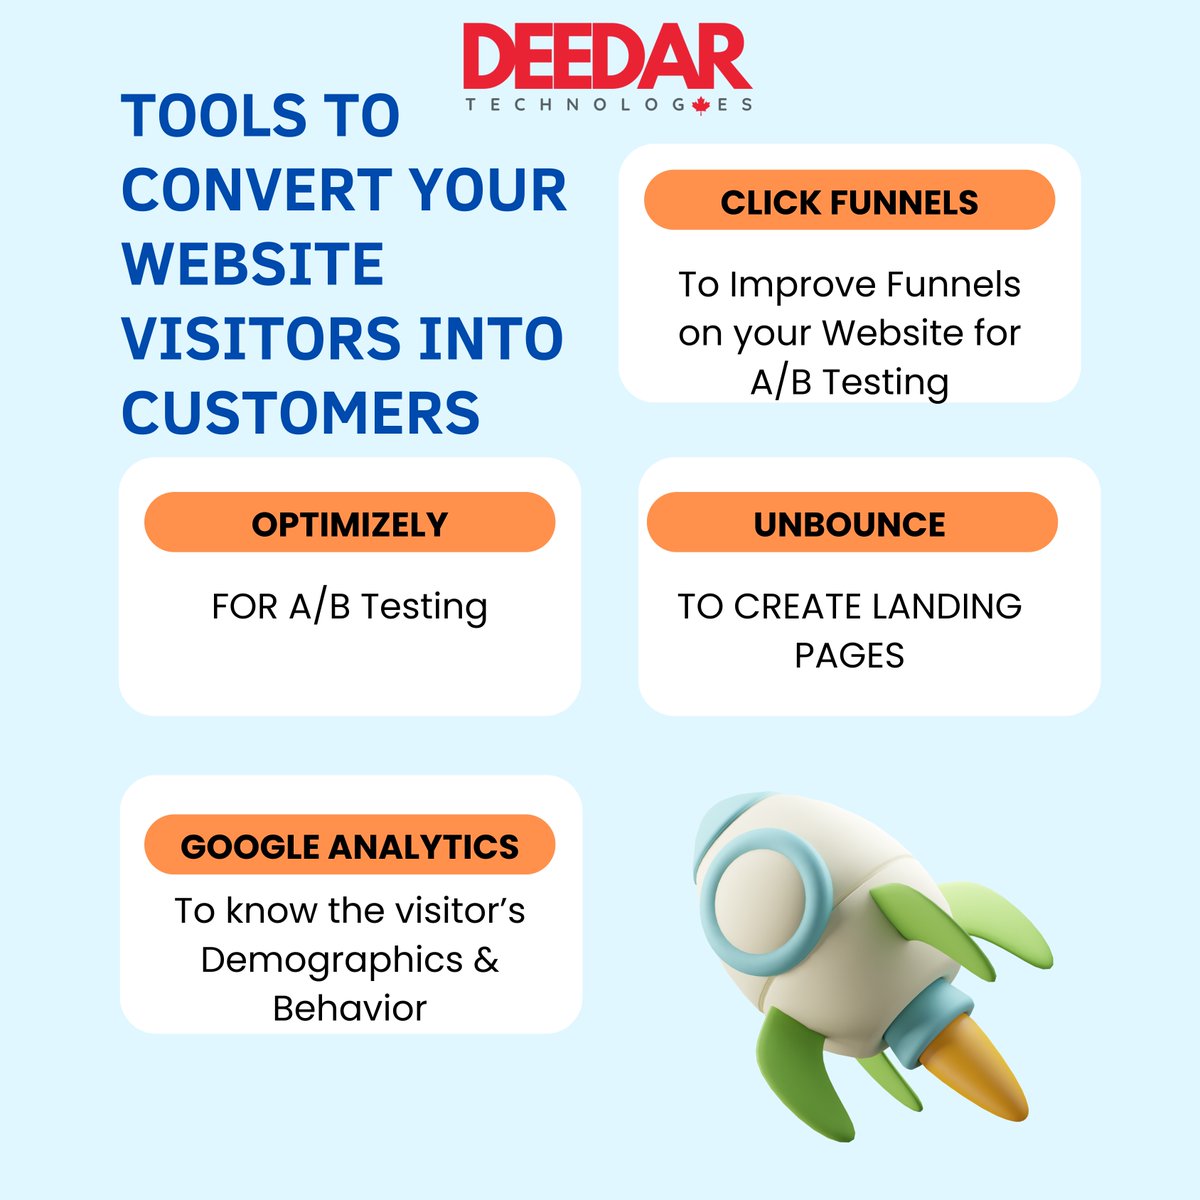 Unlock the potential of your website with Optimizely, ClickFunnels, Unbounce, and Google Analytics. Elevate visitor experiences, drive conversions, and amplify your business growth effortlessly.
#DeedarTechnologies #DigitalMarketing #DigialMarketingTips #WebDesign #WebDevelopment